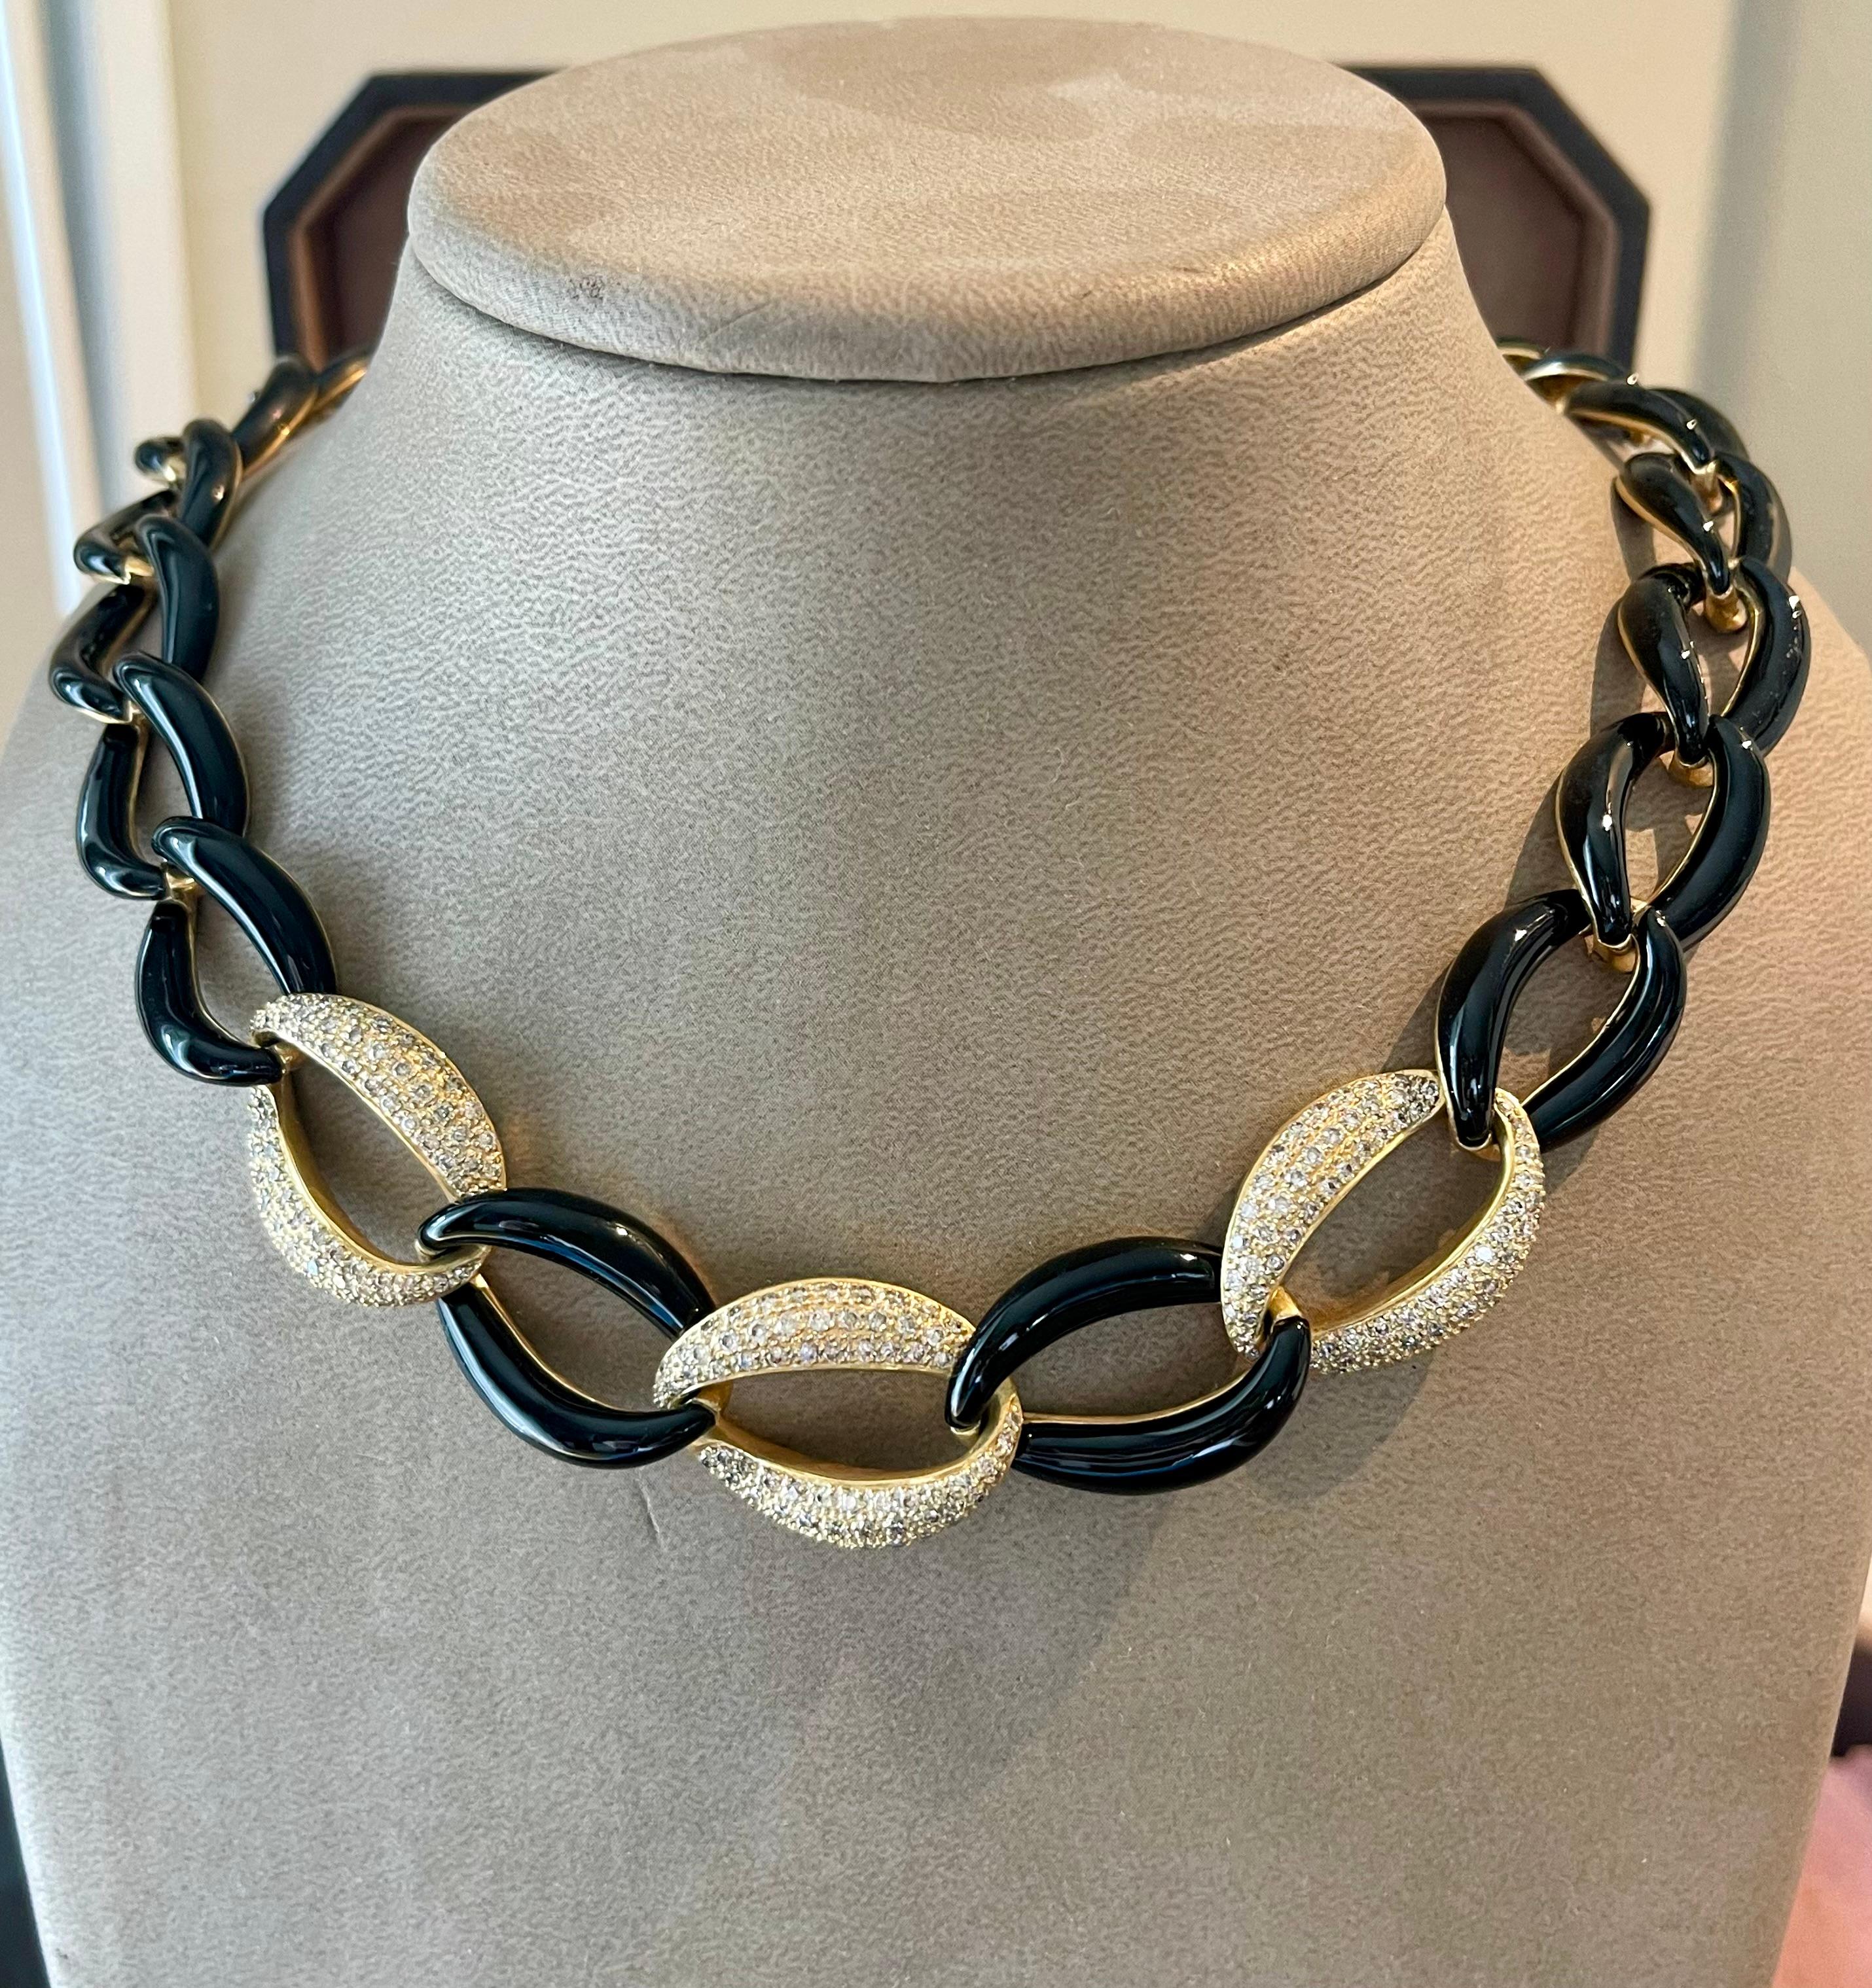 A timeless 18 K yellow Gold black Enamel Diamond necklace. 3 links are pave set with brilliant cut Diamonds. 
The link design features polished gold interwoven with black enamel accents, creating a striking juxtaposition of light and dark. The warm